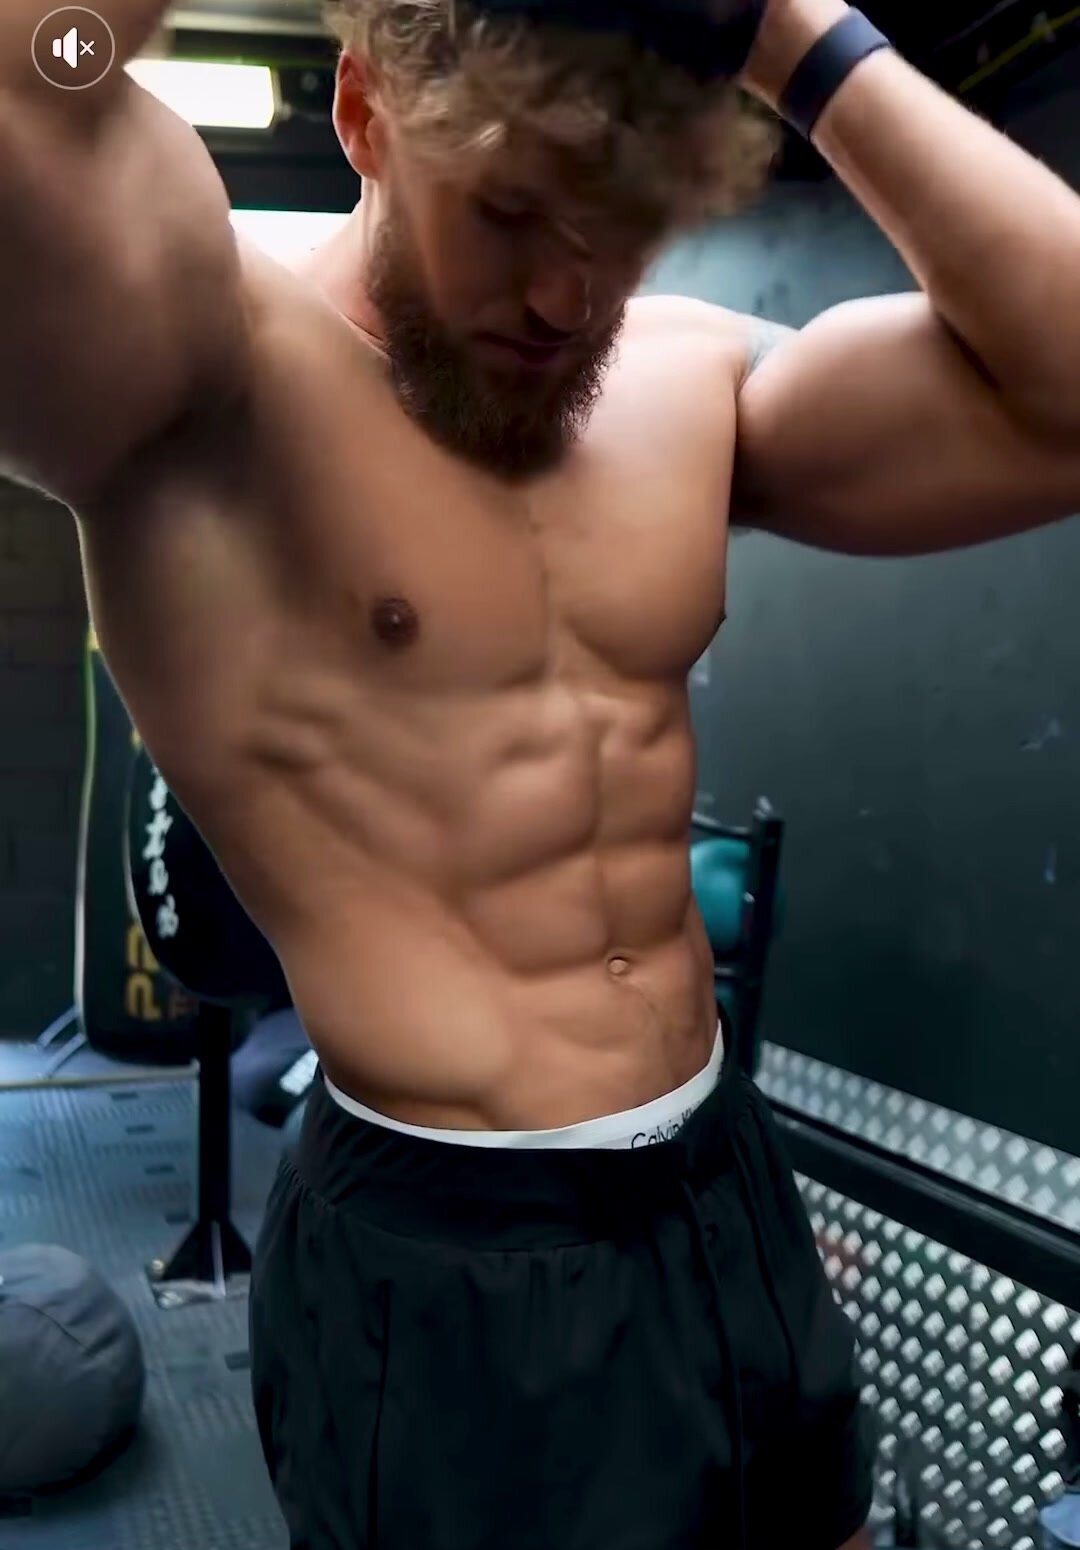 Muscular sexy blond guy showing abs and outie